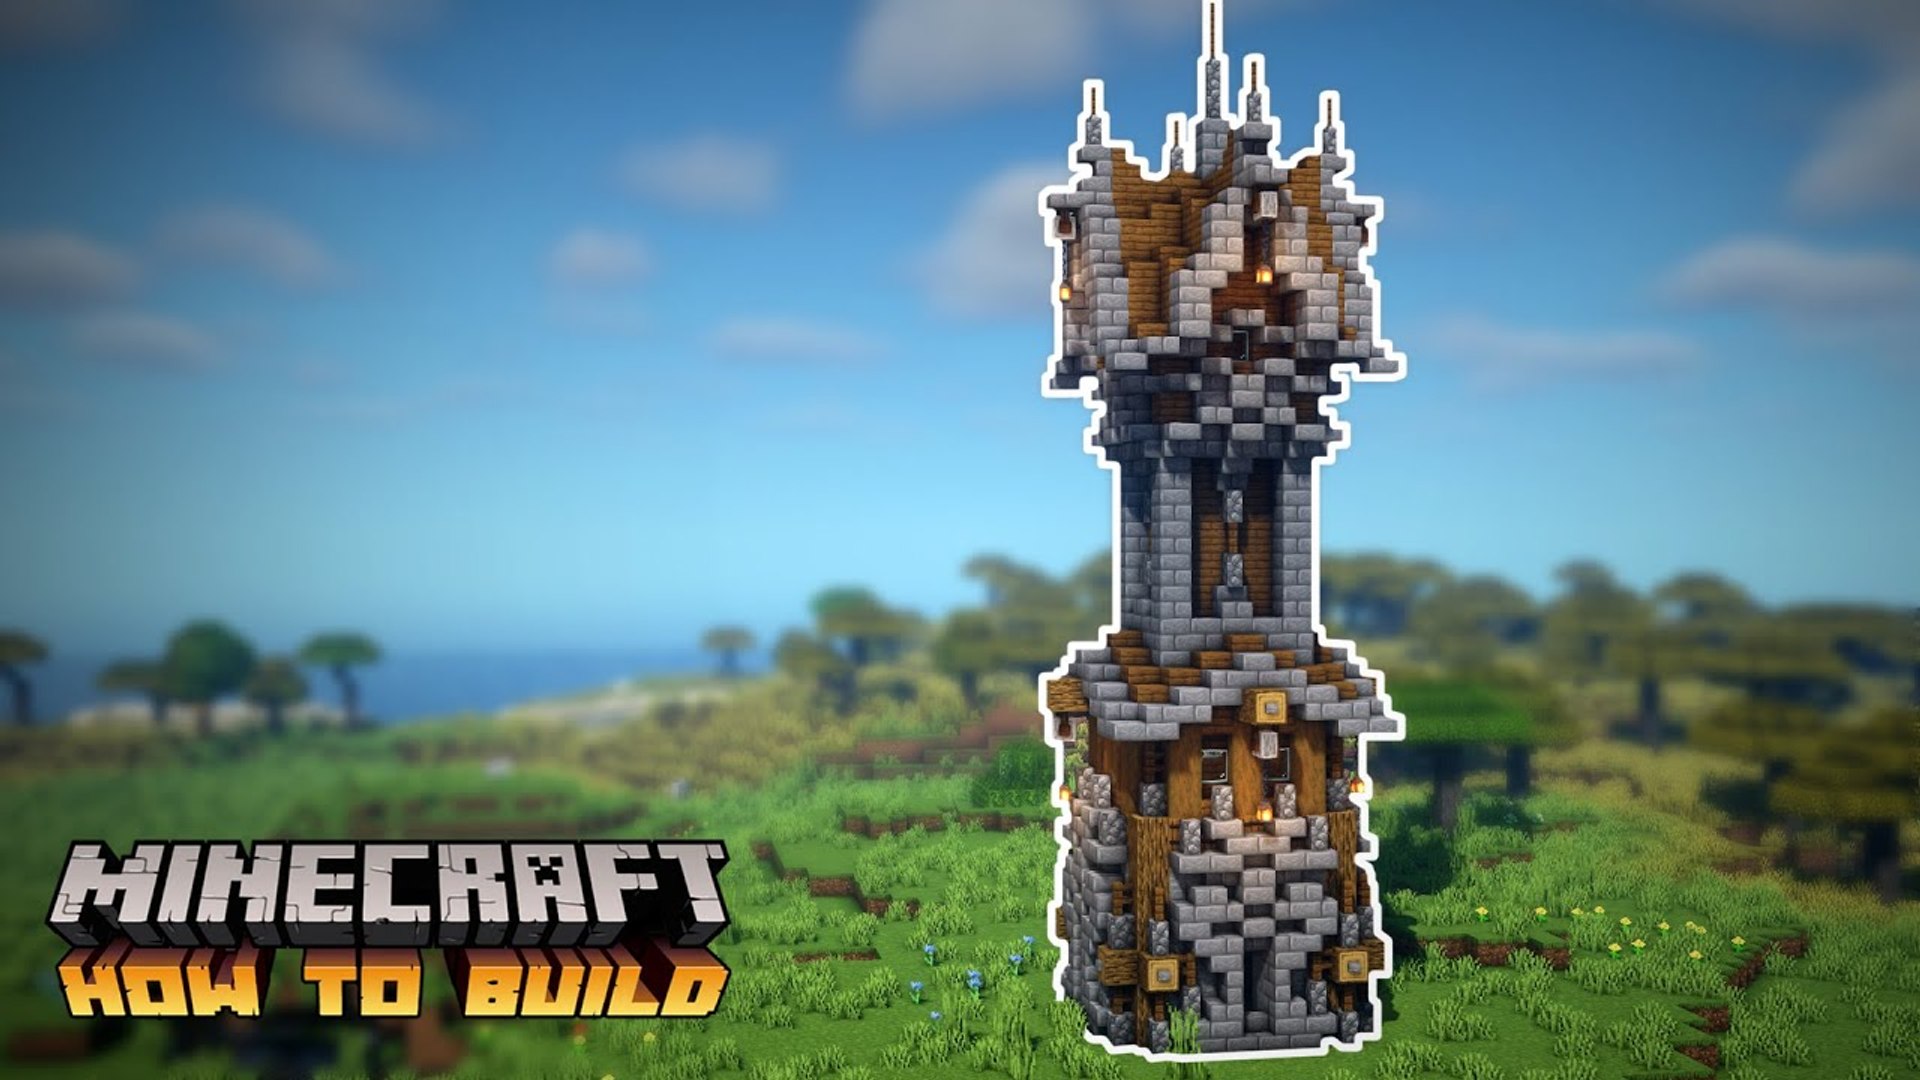 Minecraft Medieval House with Tower